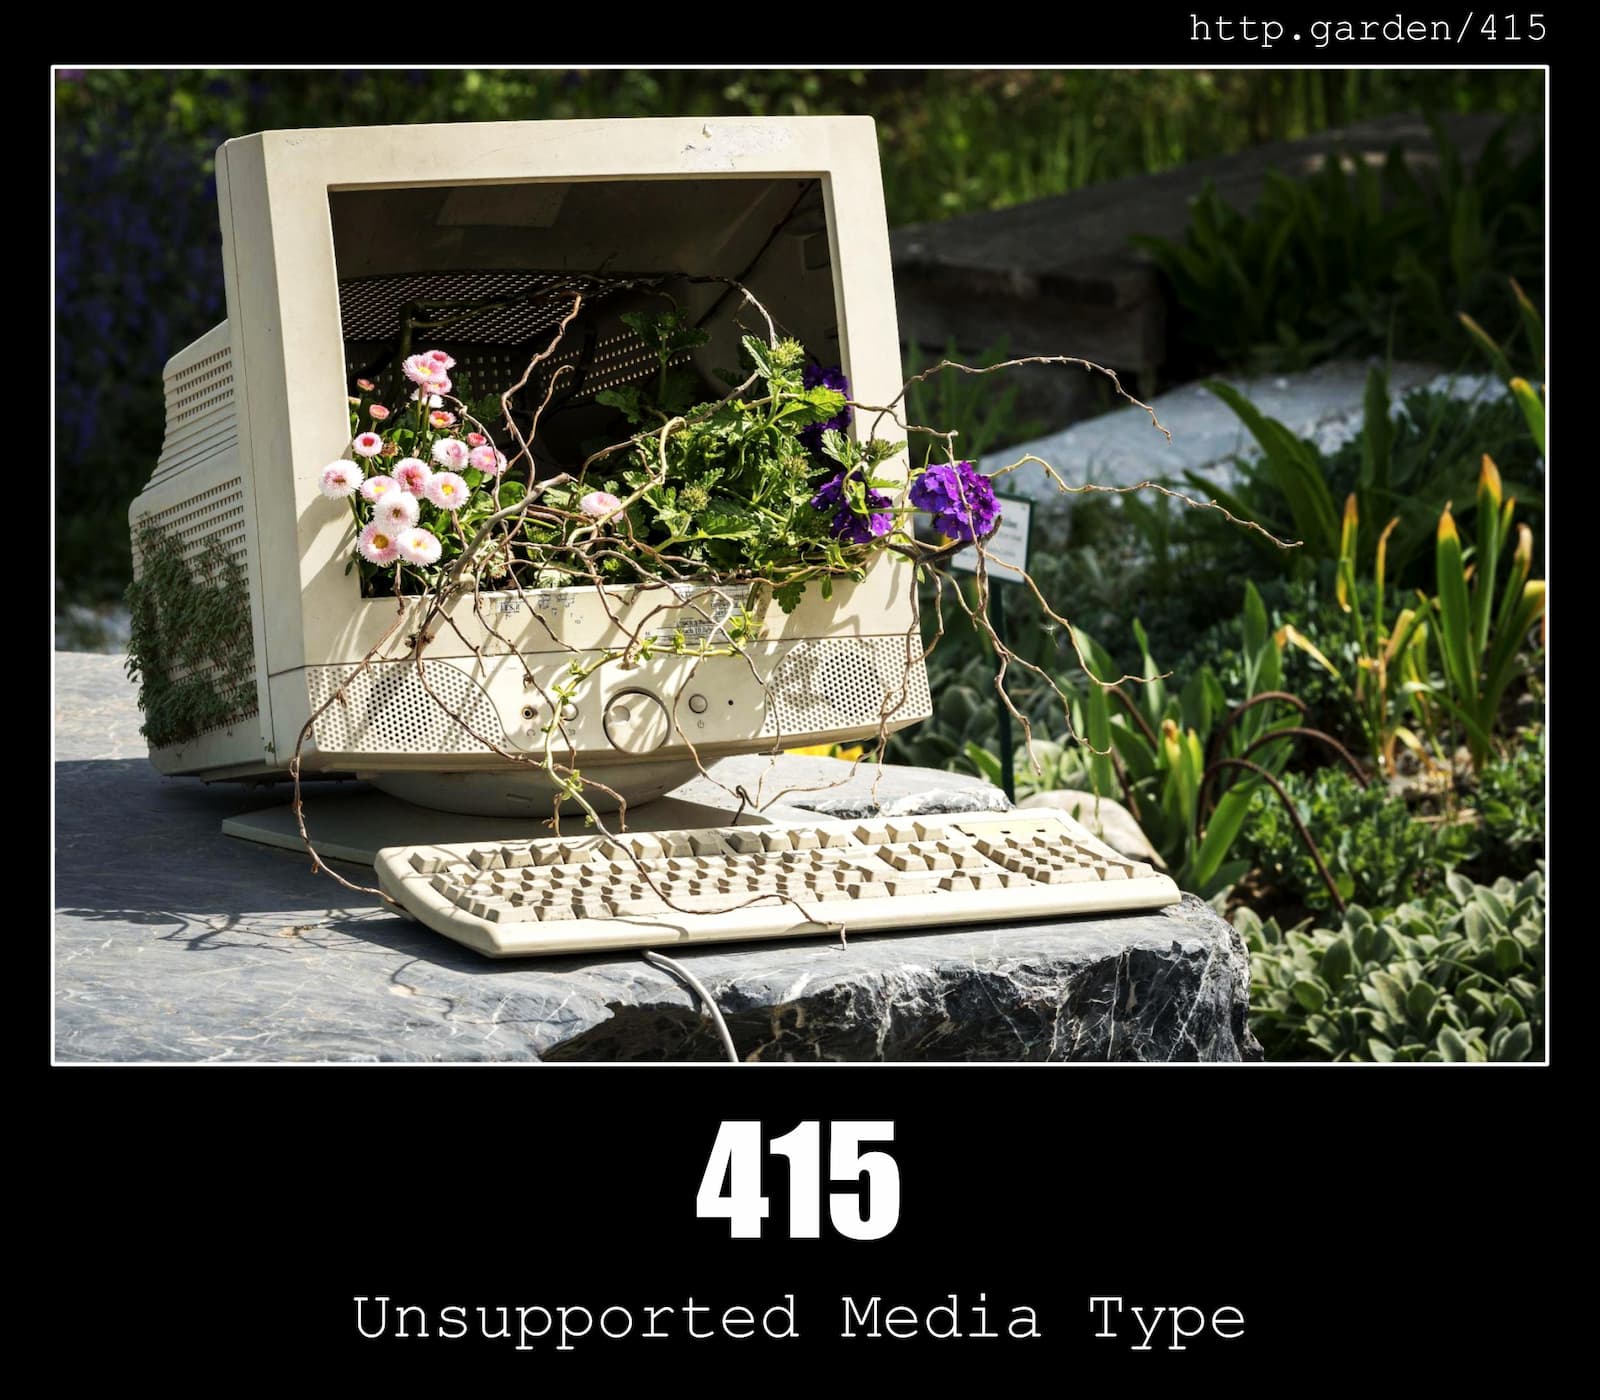 HTTP Status Code 415 Unsupported Media Type & Gardening